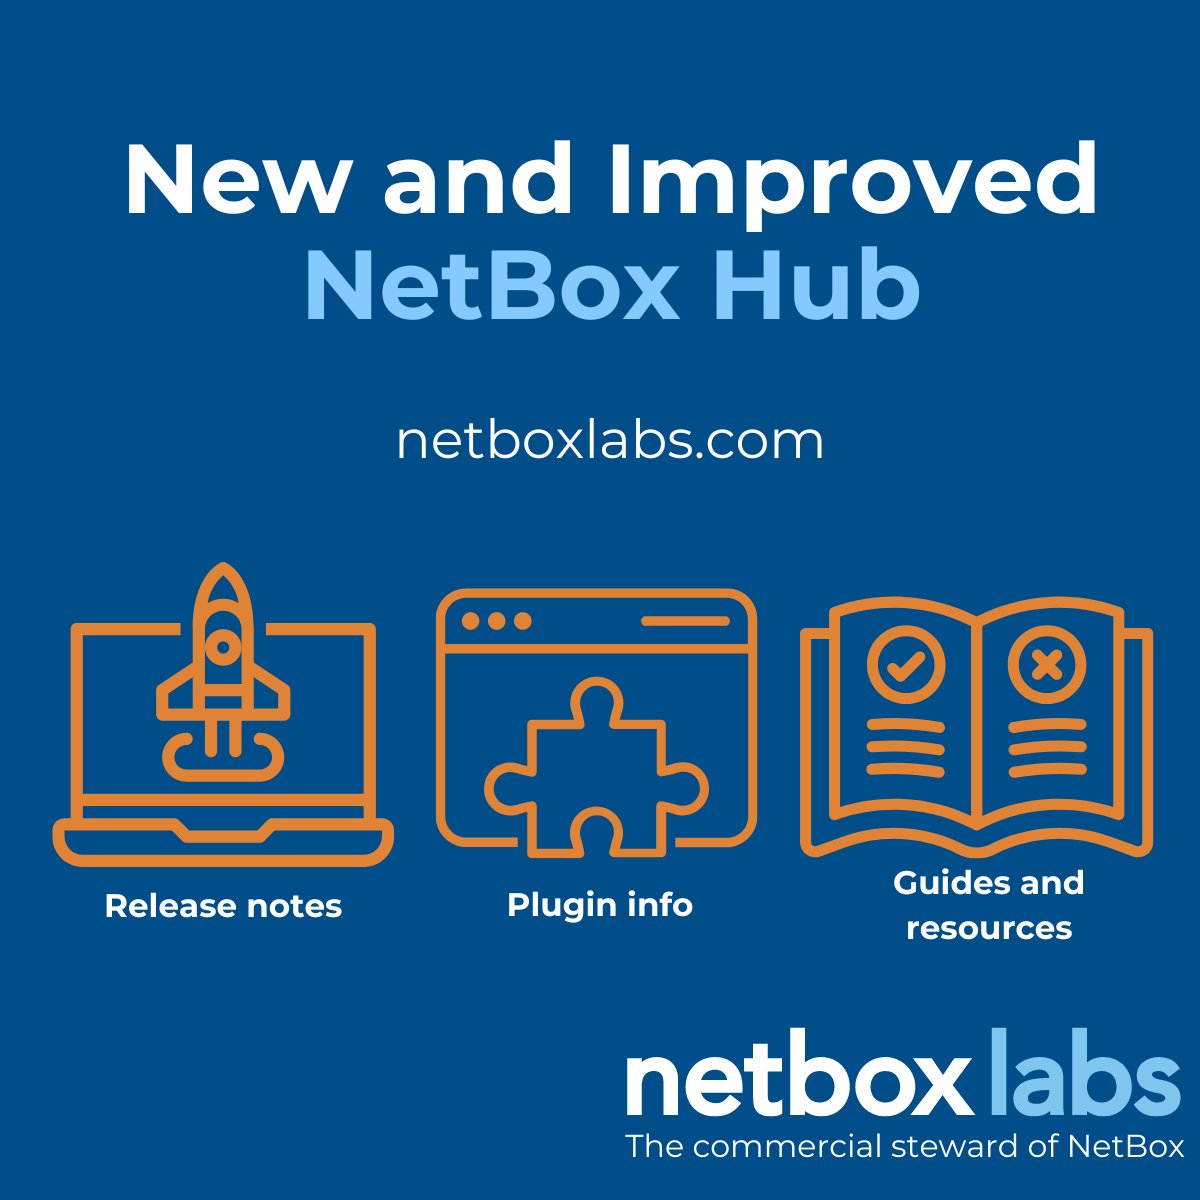 We've made it easier than ever to find the resources you need to be successful with @NetBoxOfficial. Learn more in a blog post from CEO @beevek netboxlabs.com/blog/new-netbo…